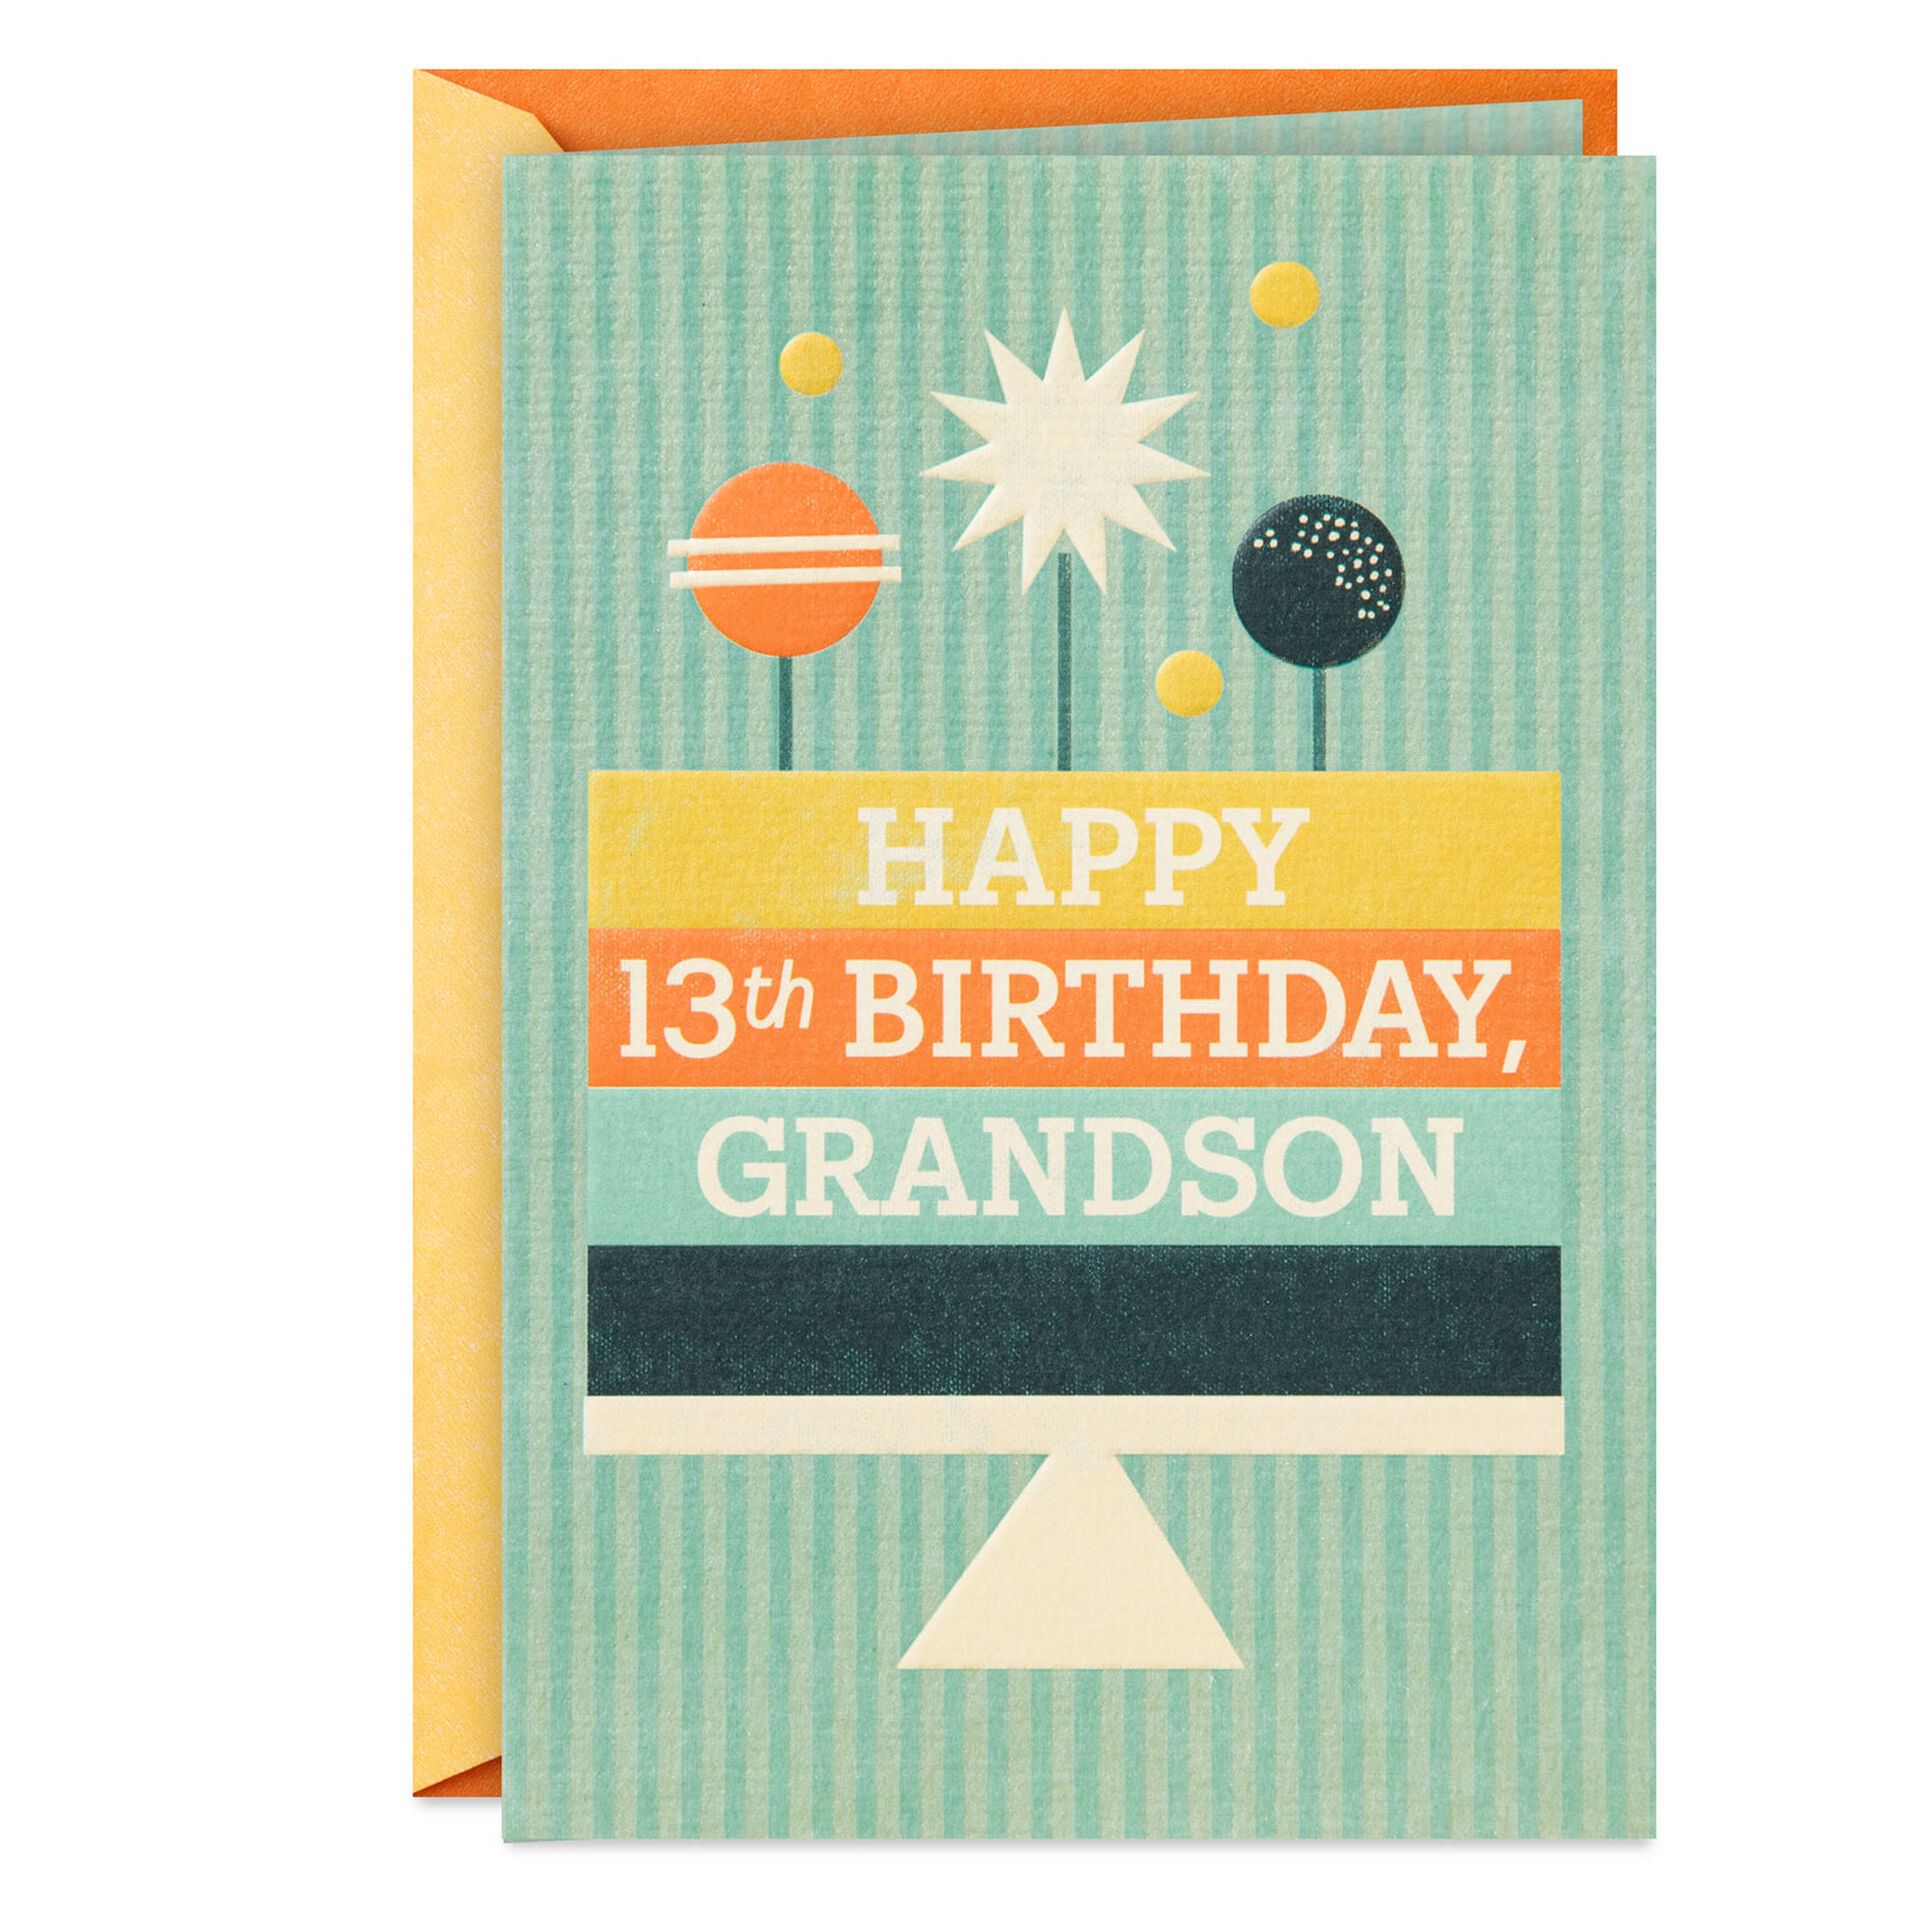 Striped-Cake-With-Planets-13th-Birthday-Card-for-Grandson_399MAN4136_01